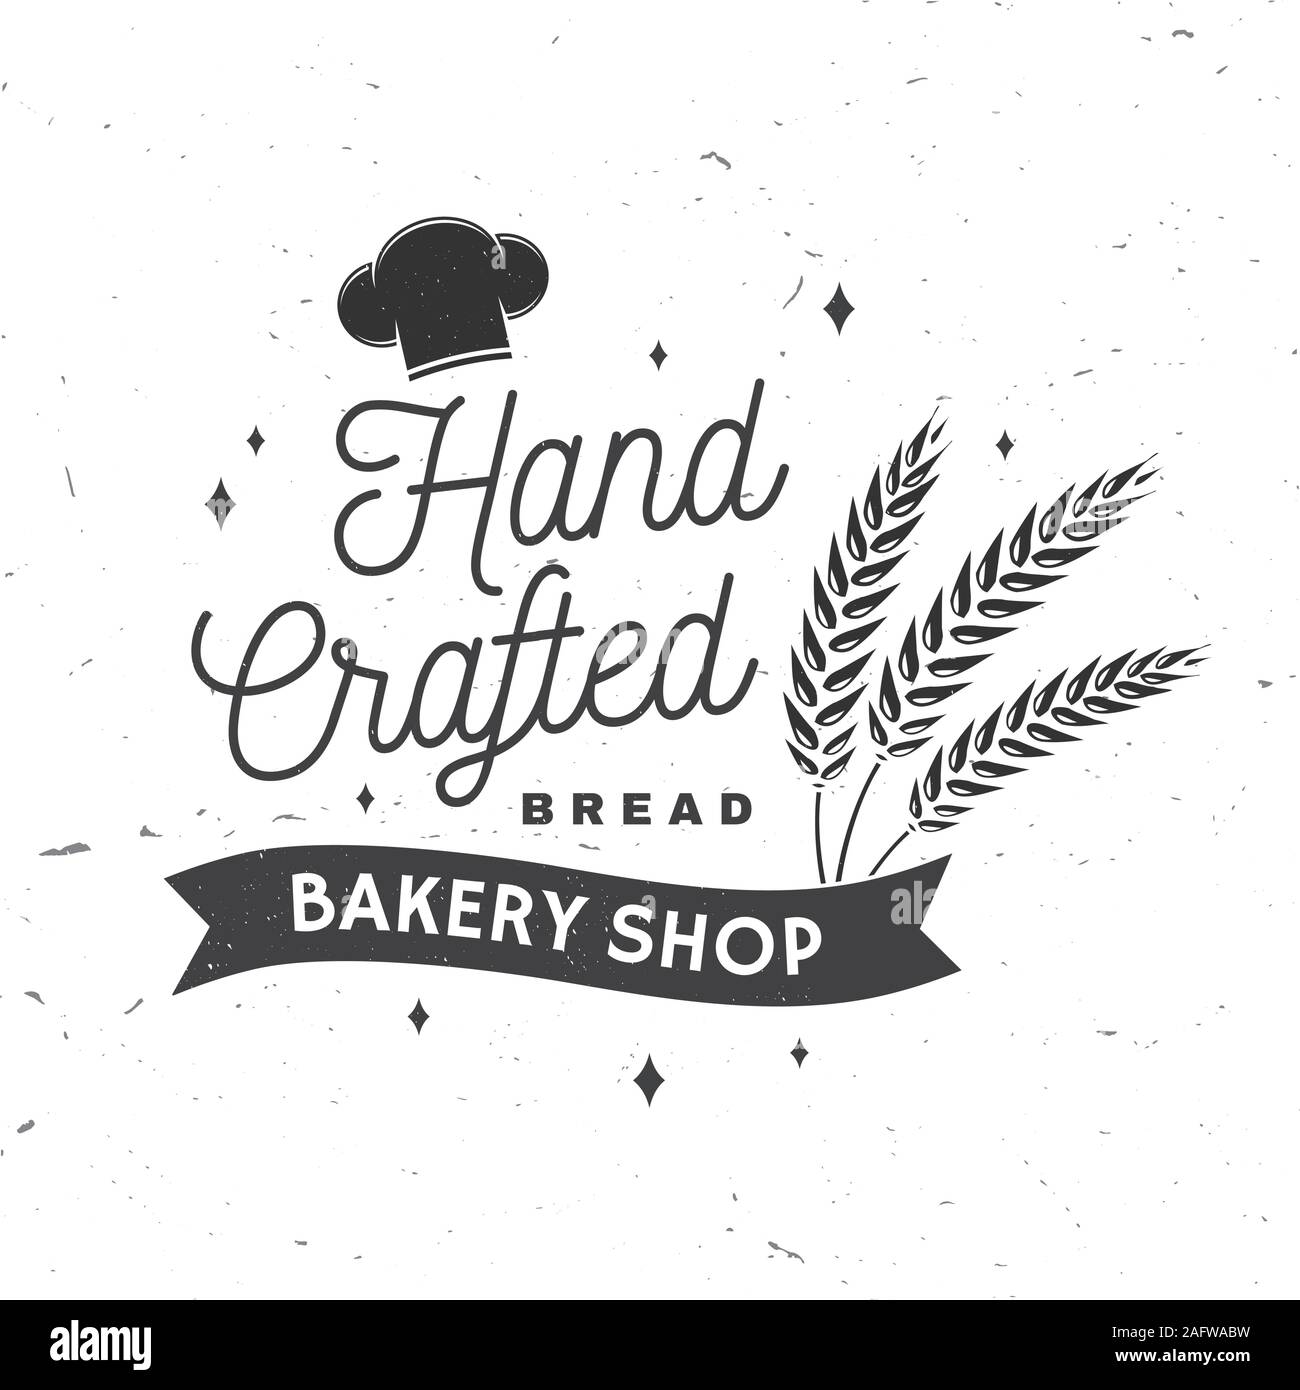 Bakery shop. Vector. Concept for badge, shirt, label, print, stamp or tee. Typography design with chef hat, text, wheat ears silhouette. Template for restaurant identity objects, packaging and menu Stock Vector